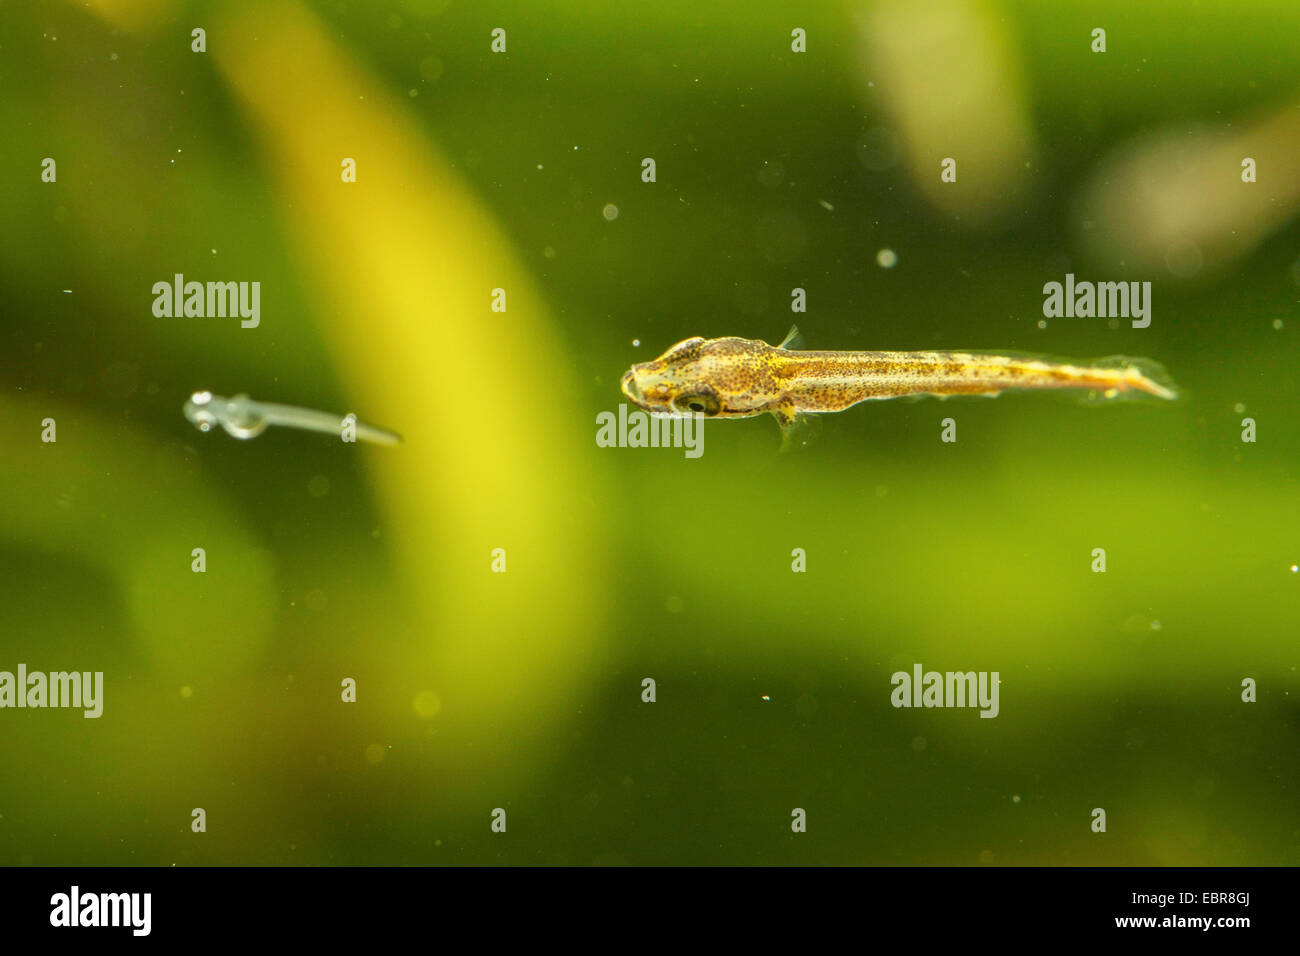 pike, northern pike (Esox lucius), swimming larva preying on water larva of a perch, Germany Stock Photo